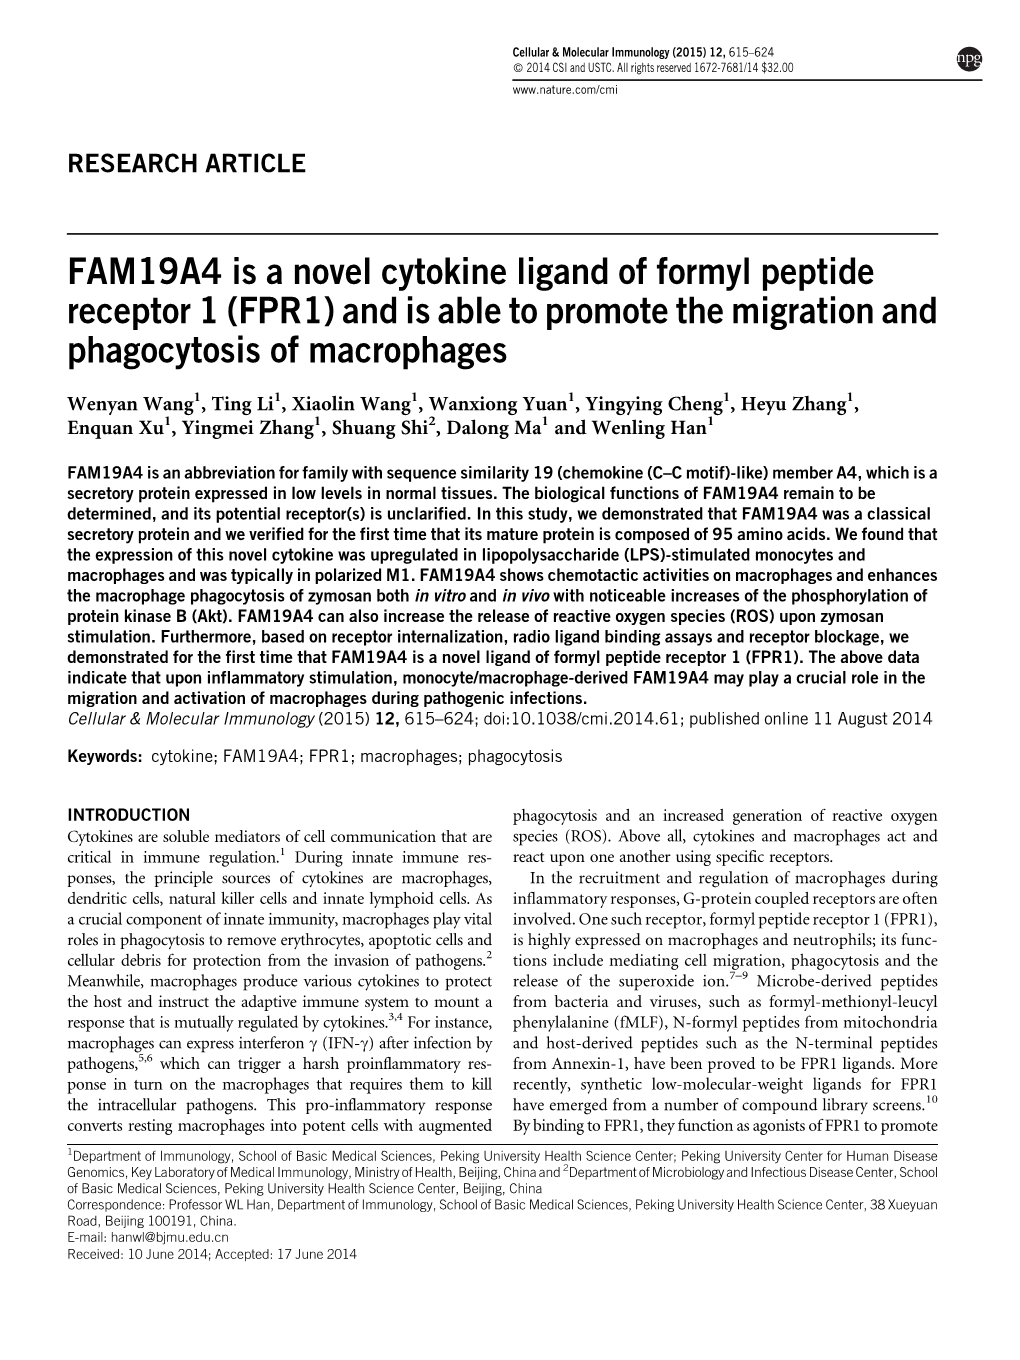 FAM19A4 Is a Novel Cytokine Ligand of Formyl Peptide Receptor 1 (FPR1) and Is Able to Promote the Migration and Phagocytosis of Macrophages